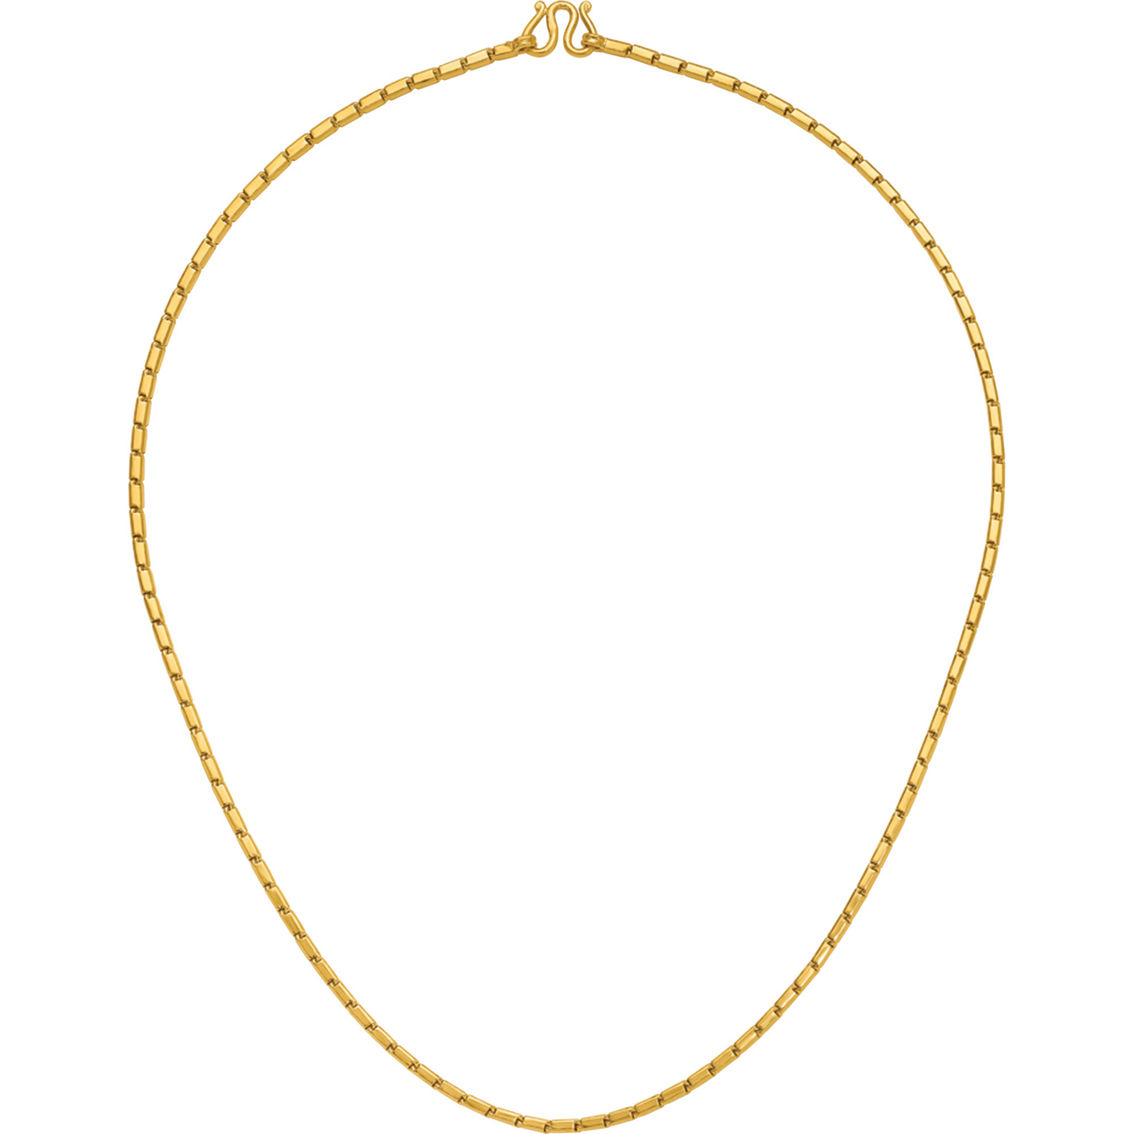 24K Pure Gold 24K Yellow Gold Solid Square 3mm Barrel Link 18 in. Chain - Image 3 of 5